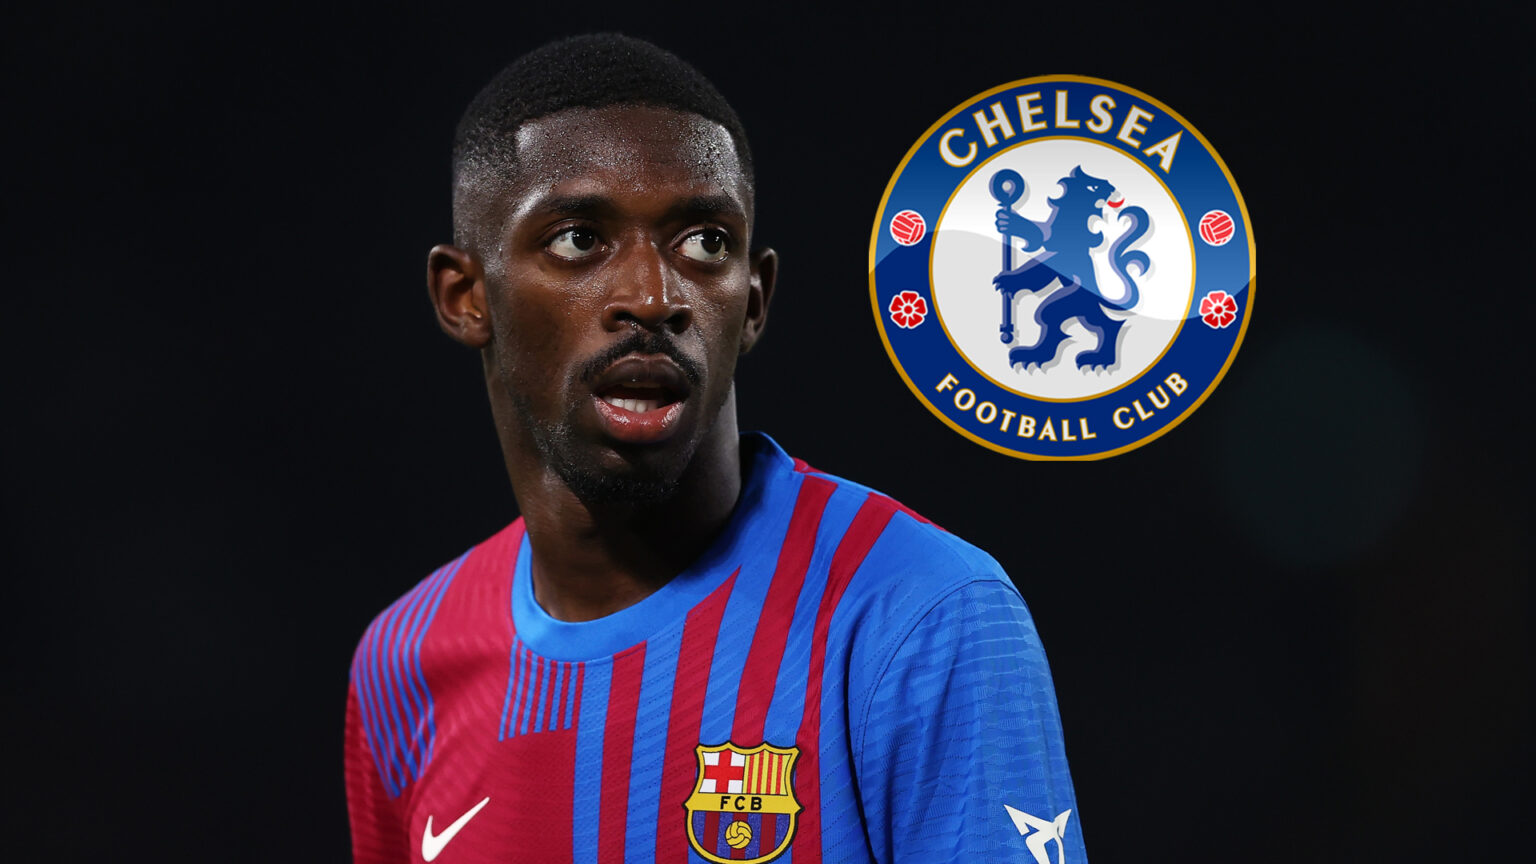 Ousmane Dembele closes in on Chelsea transfer with Barcelona contract rebel’s agent in ‘advanced negotiations’